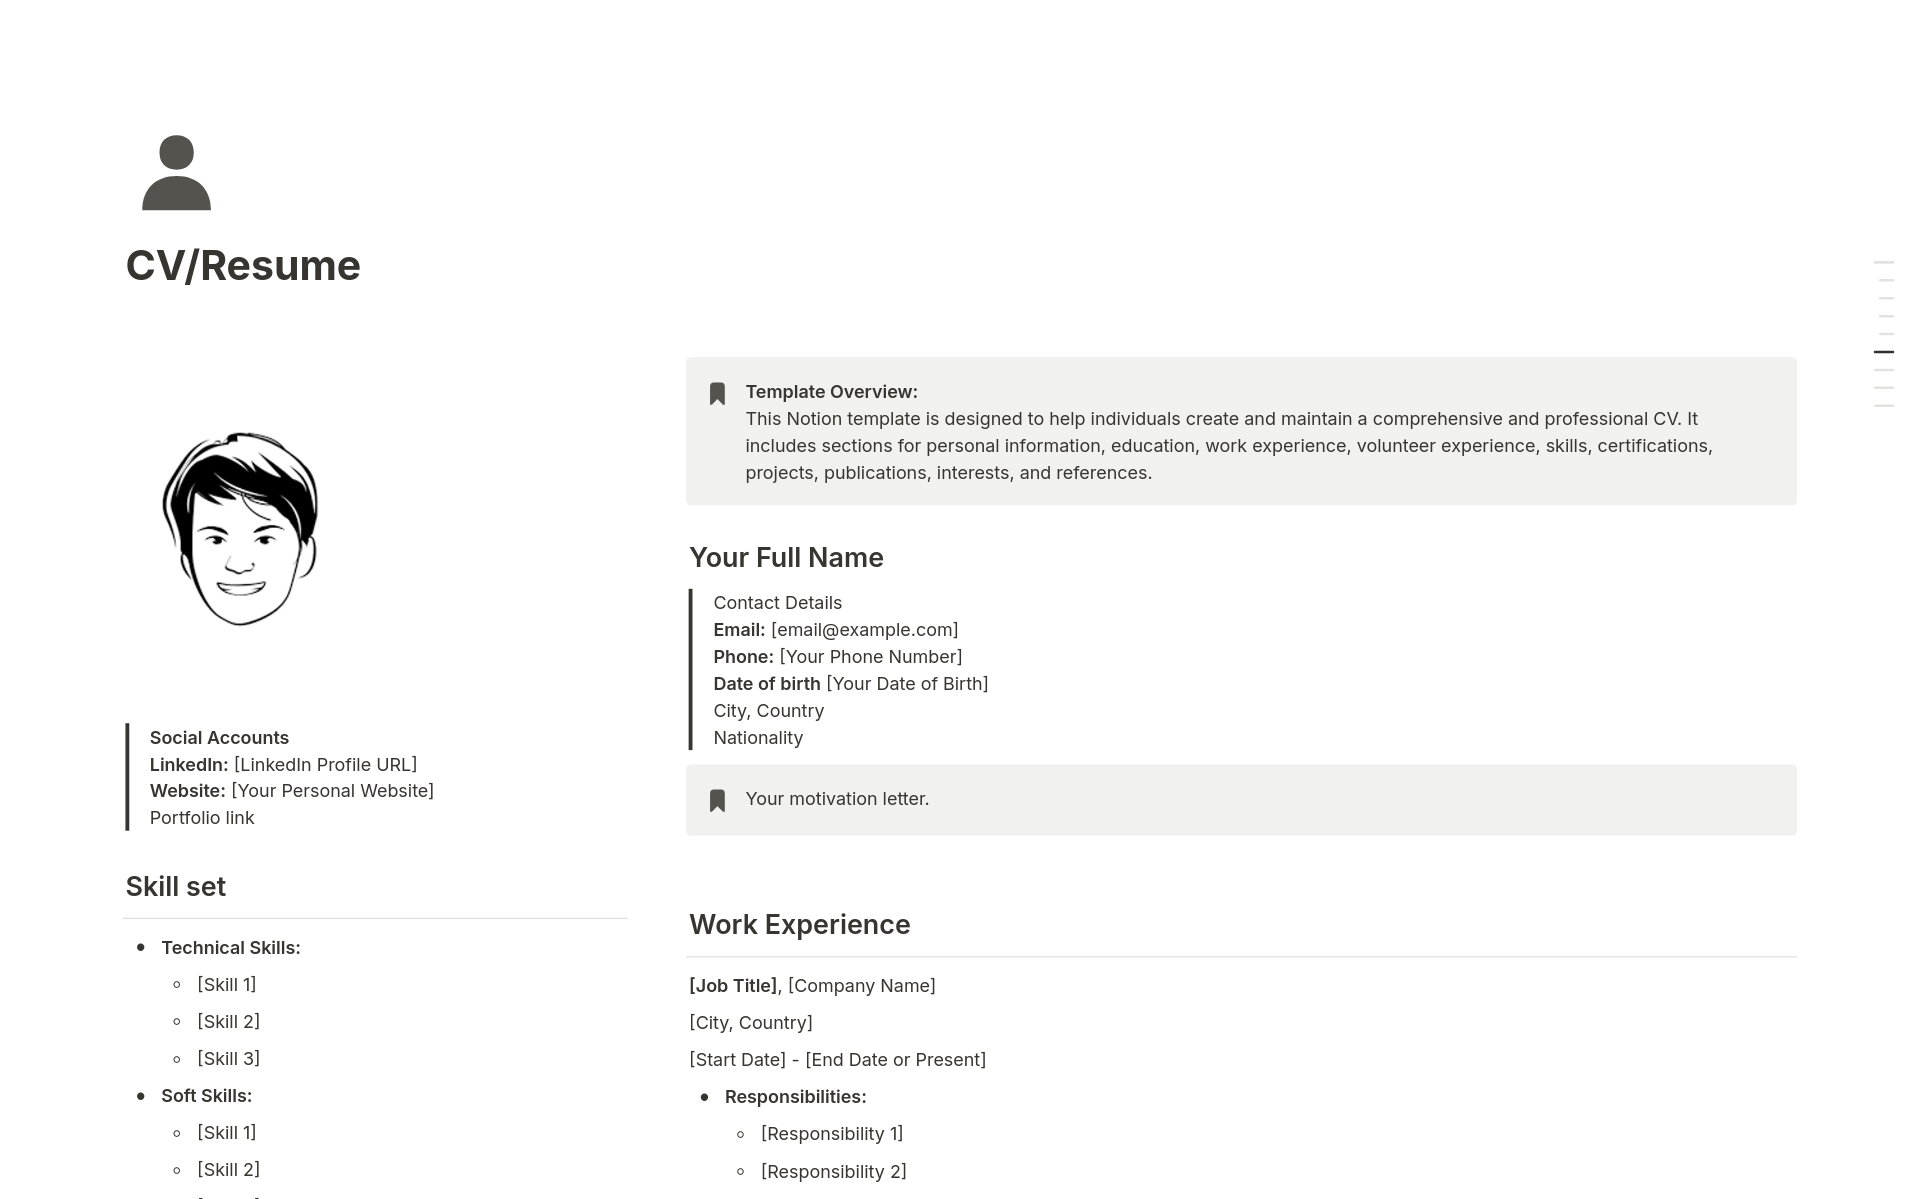 A template preview for CV/Resume